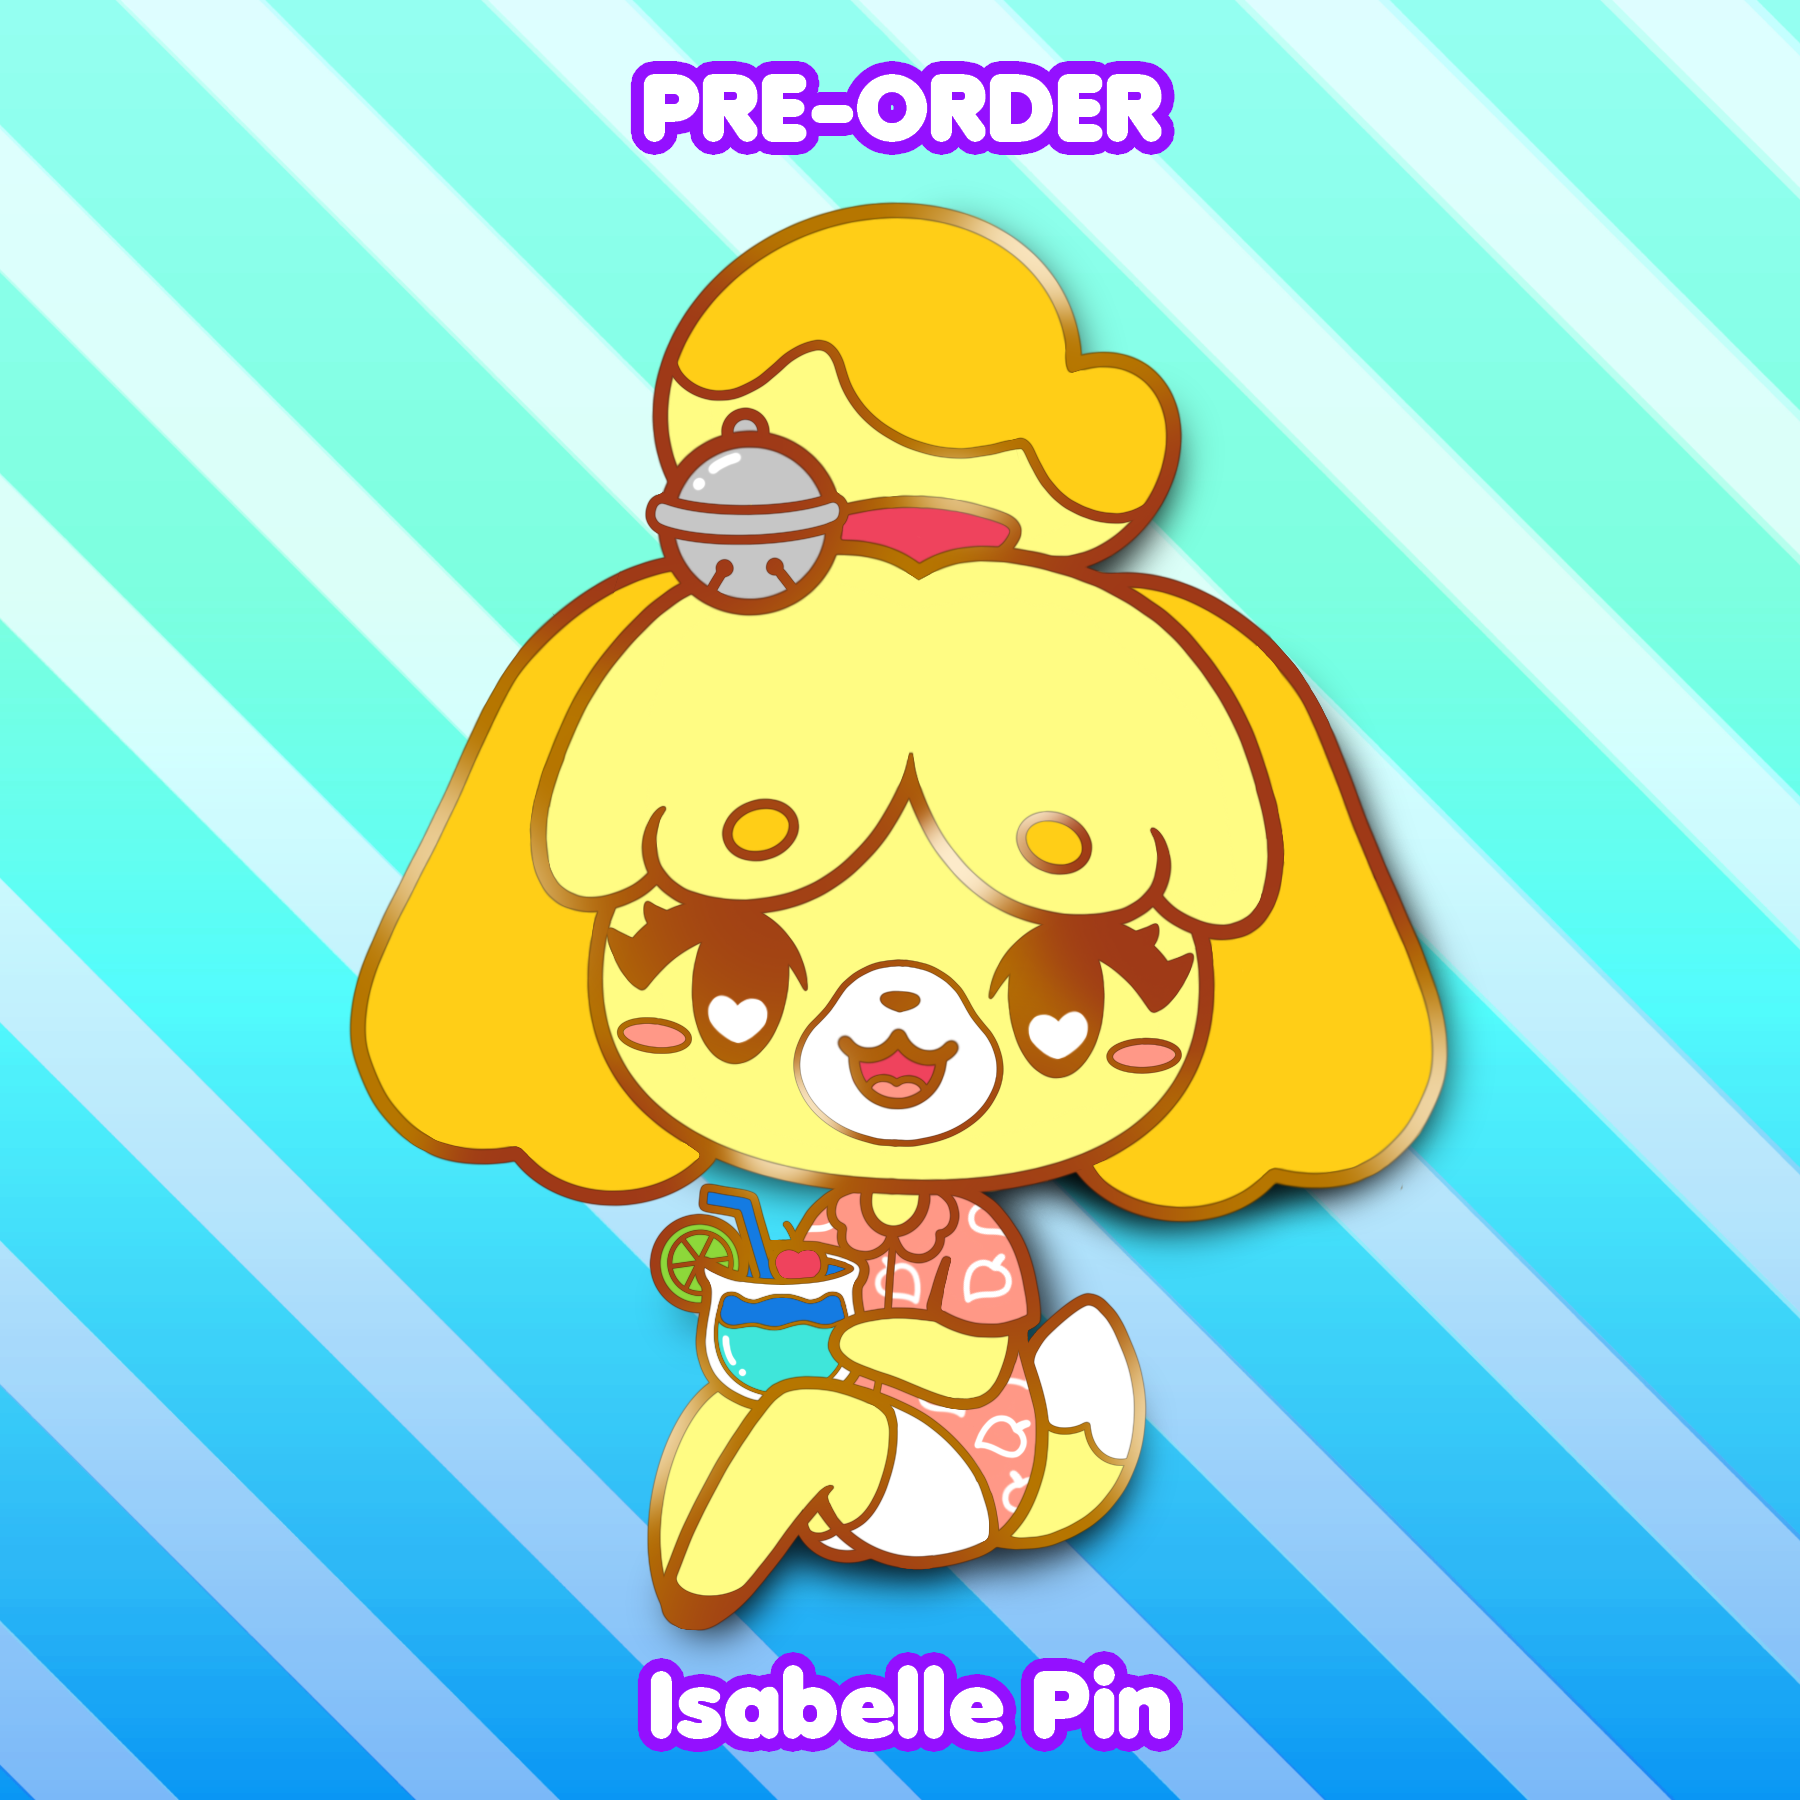 Isabelle-Pinpreorder_1024x1024@2x.png